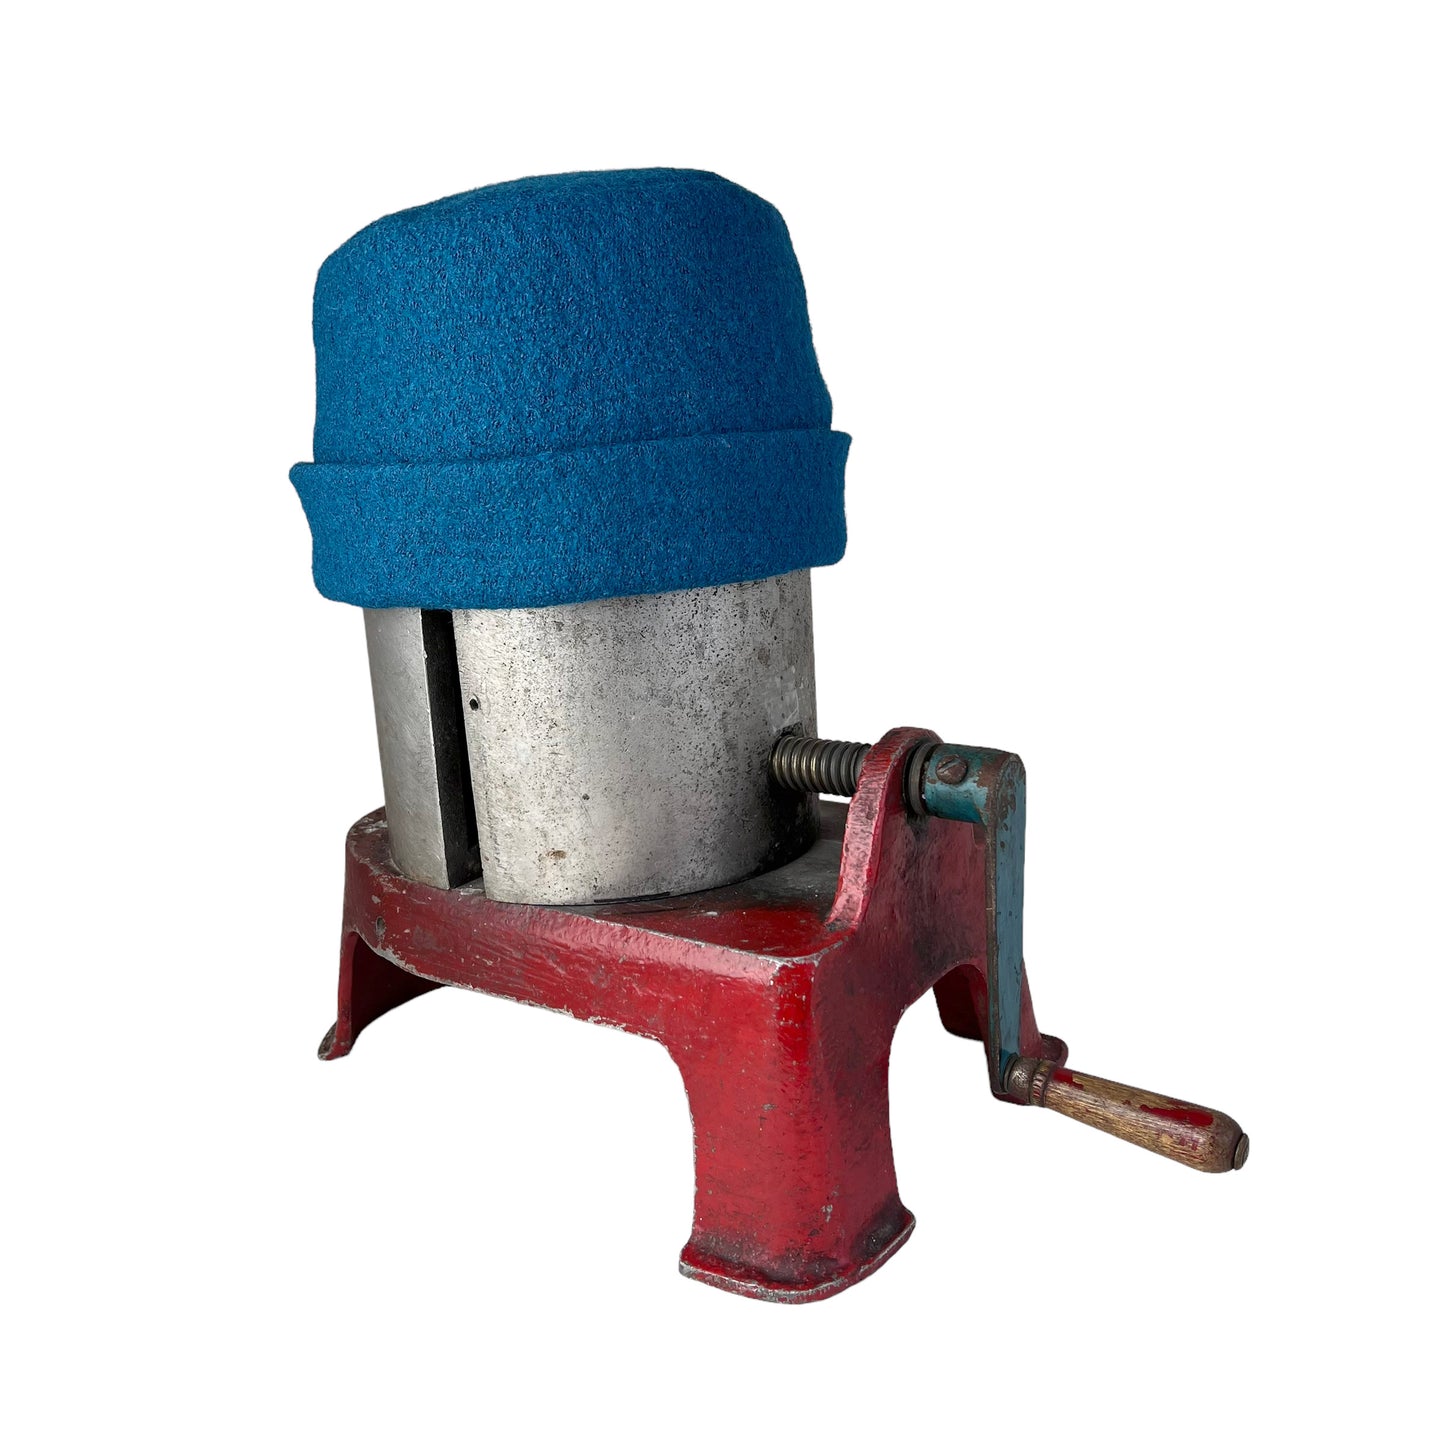 Hedy Wool Pillbox Hat X Small Turquoise